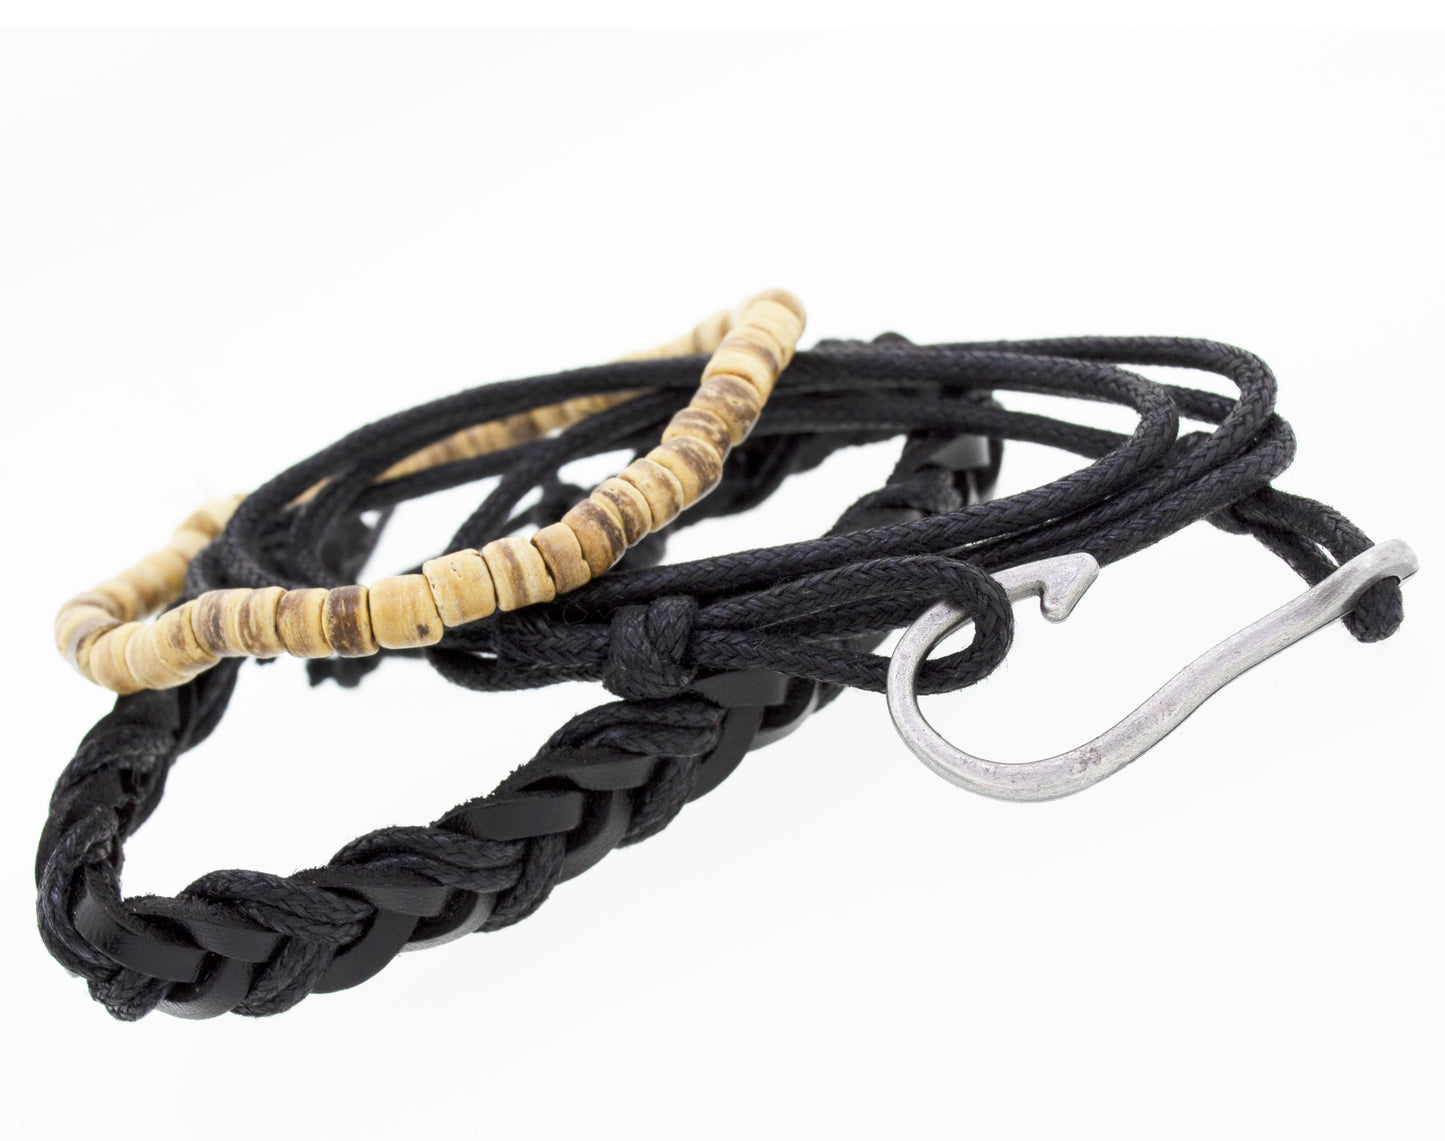 A Three Bracelet Set with a wooden hook and faux leather accents.